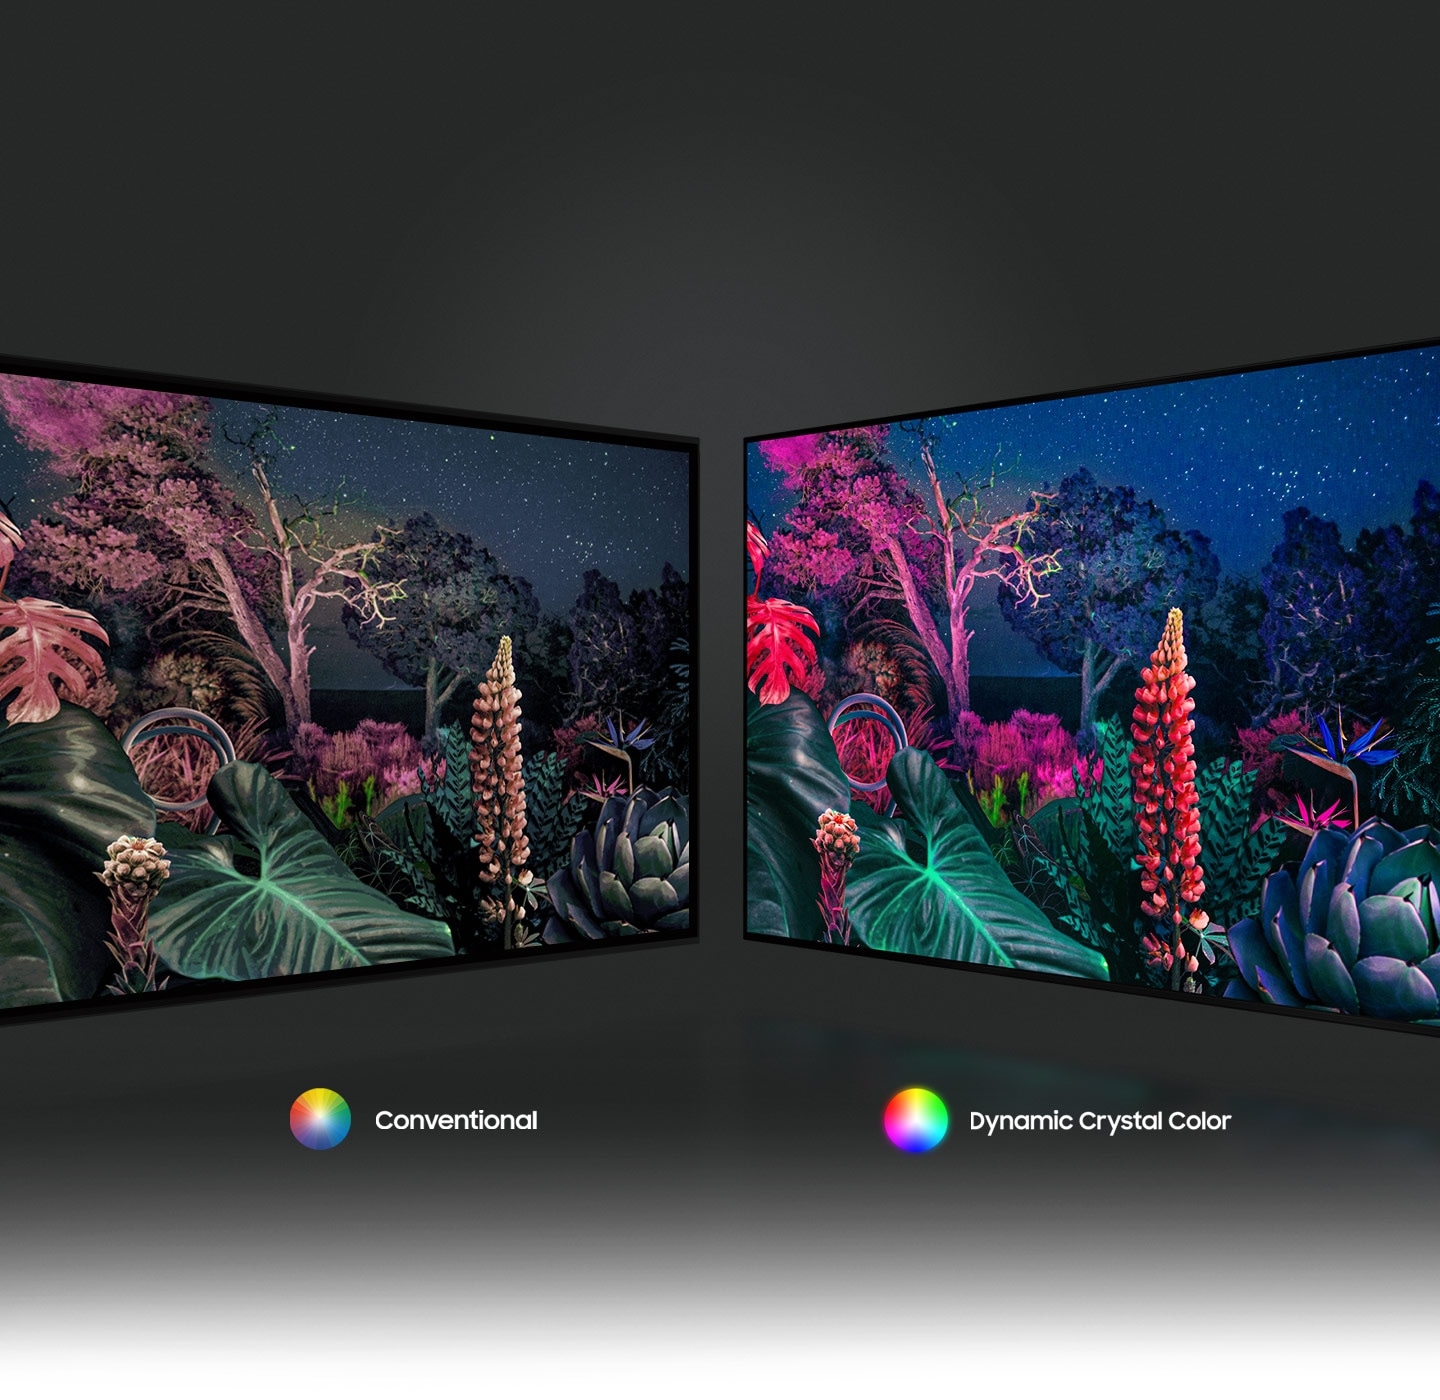 The forest image on the right demonstrates a more intricately colored image due to Dynamic Crystal Color technology compare to the conventional on the left.